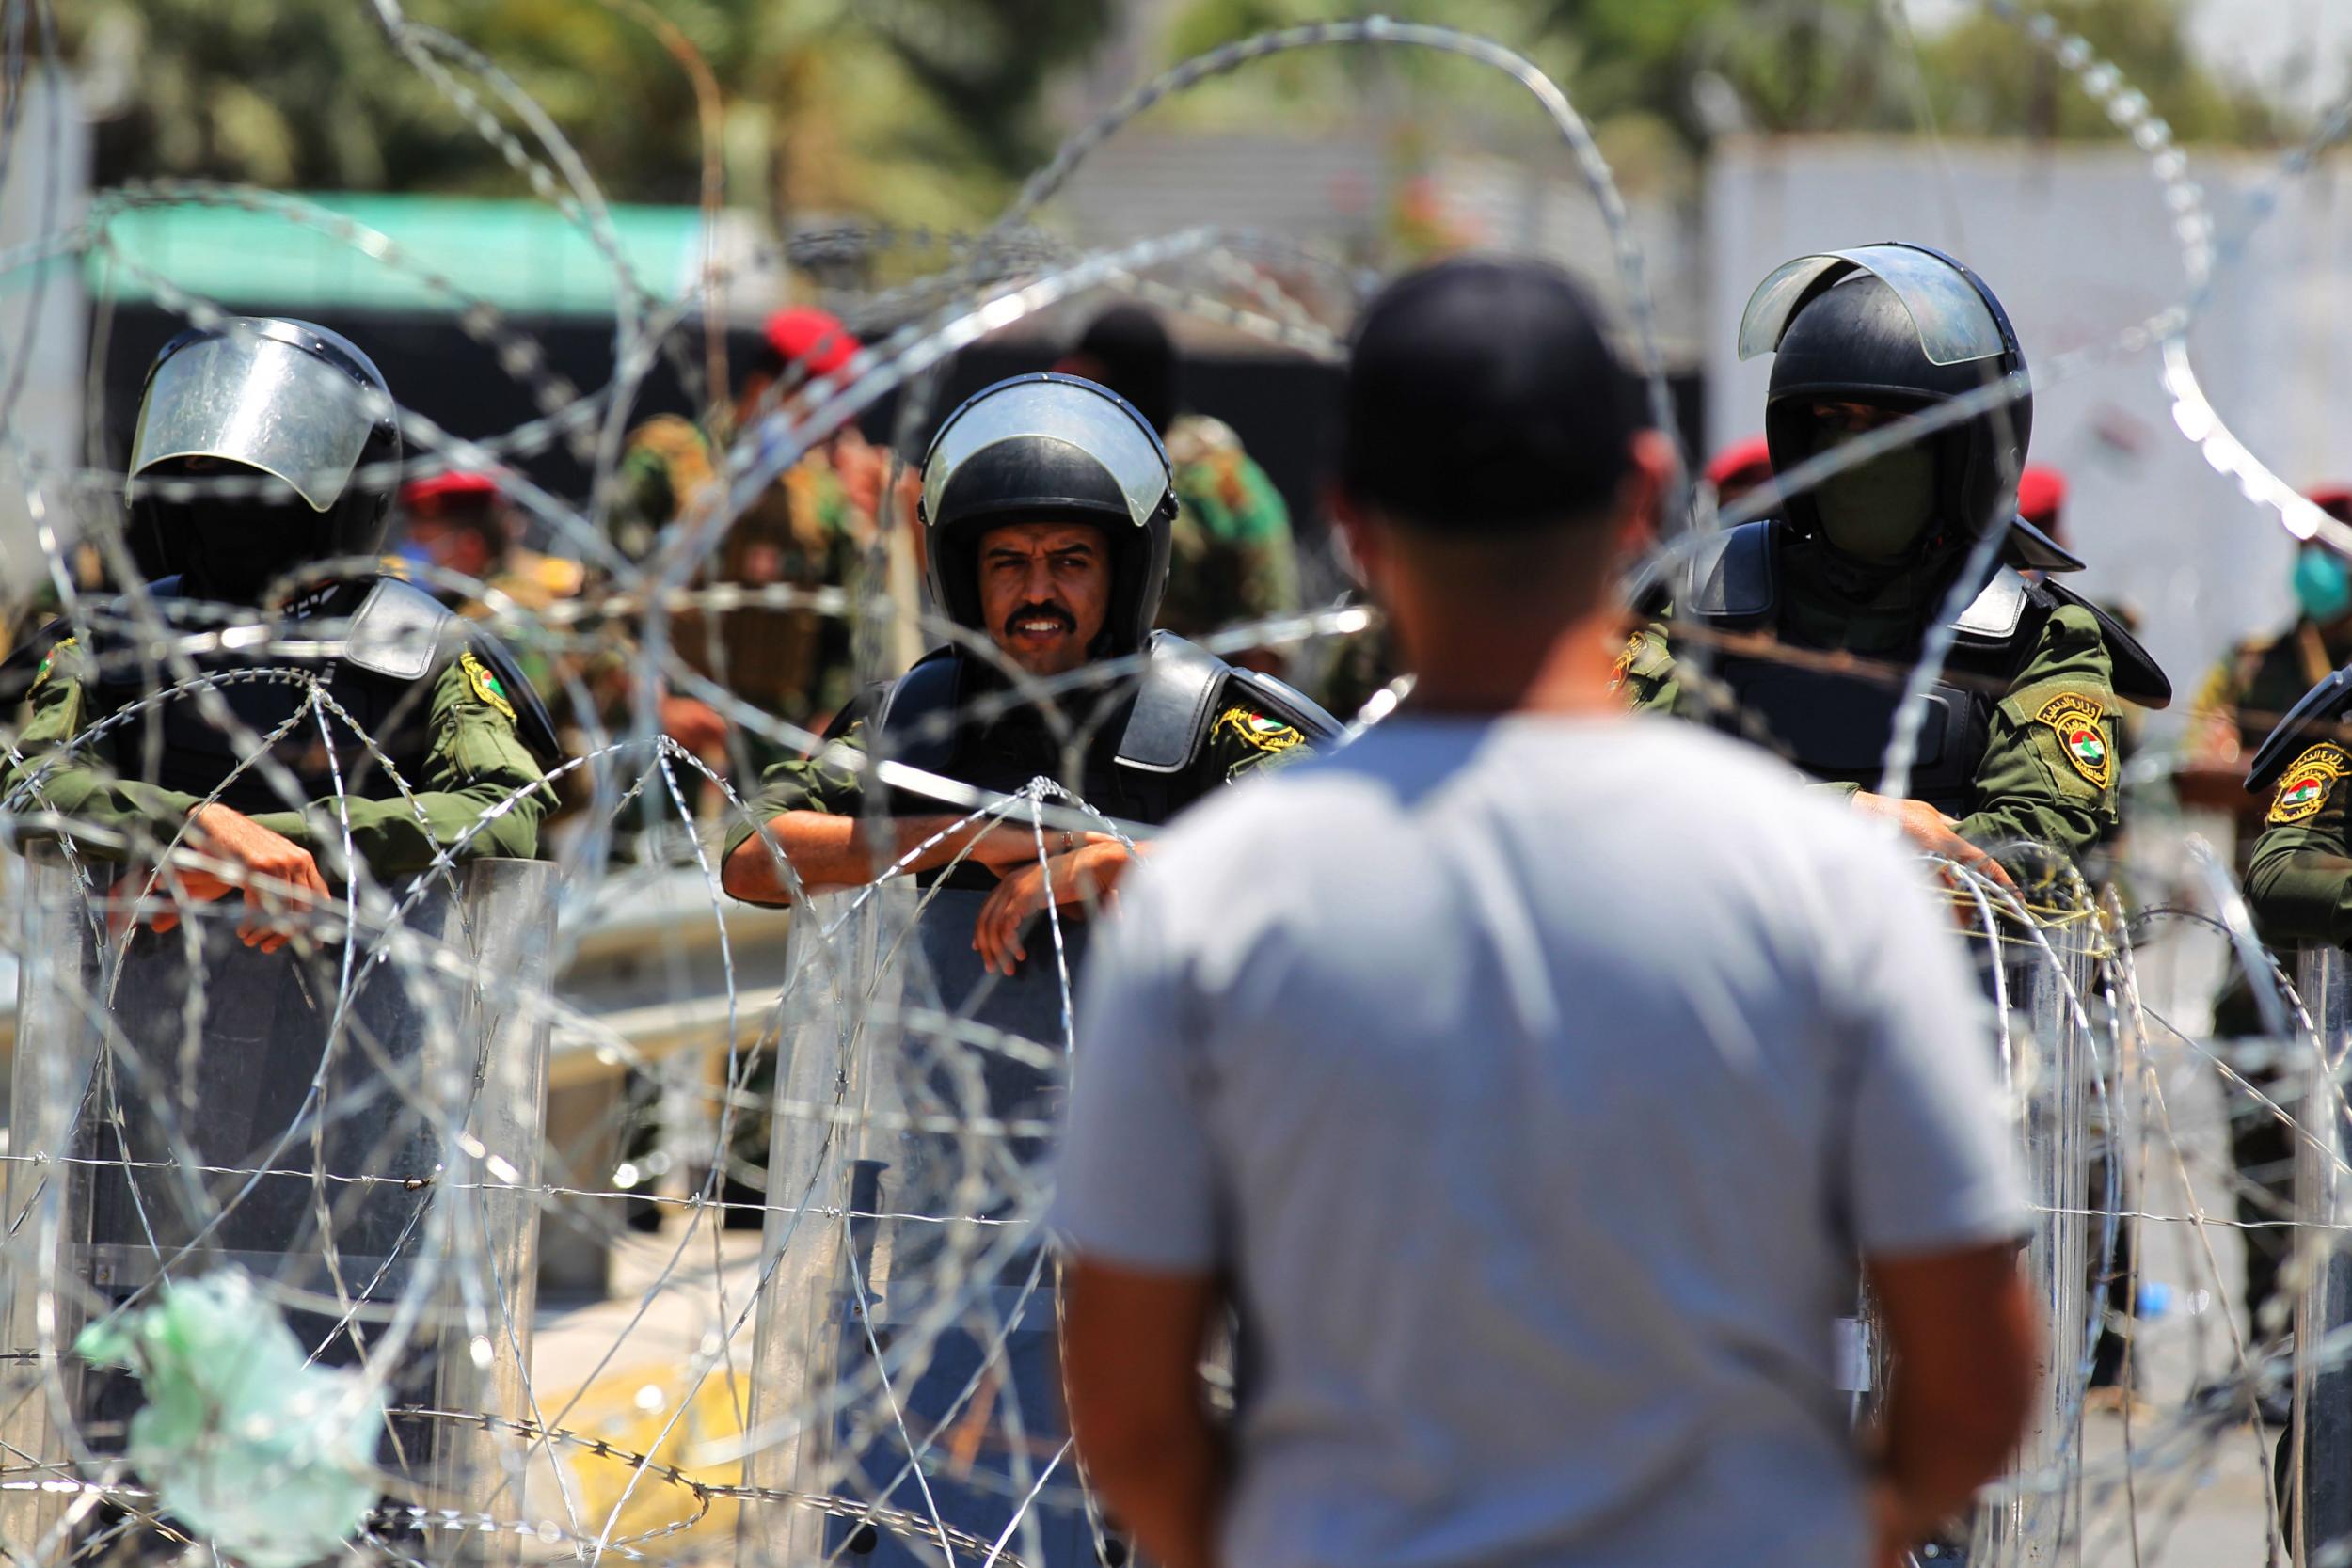 Iraqi security forces stand guard outside the entrance of the Green Zone during a protest in the capital Baghdad in July